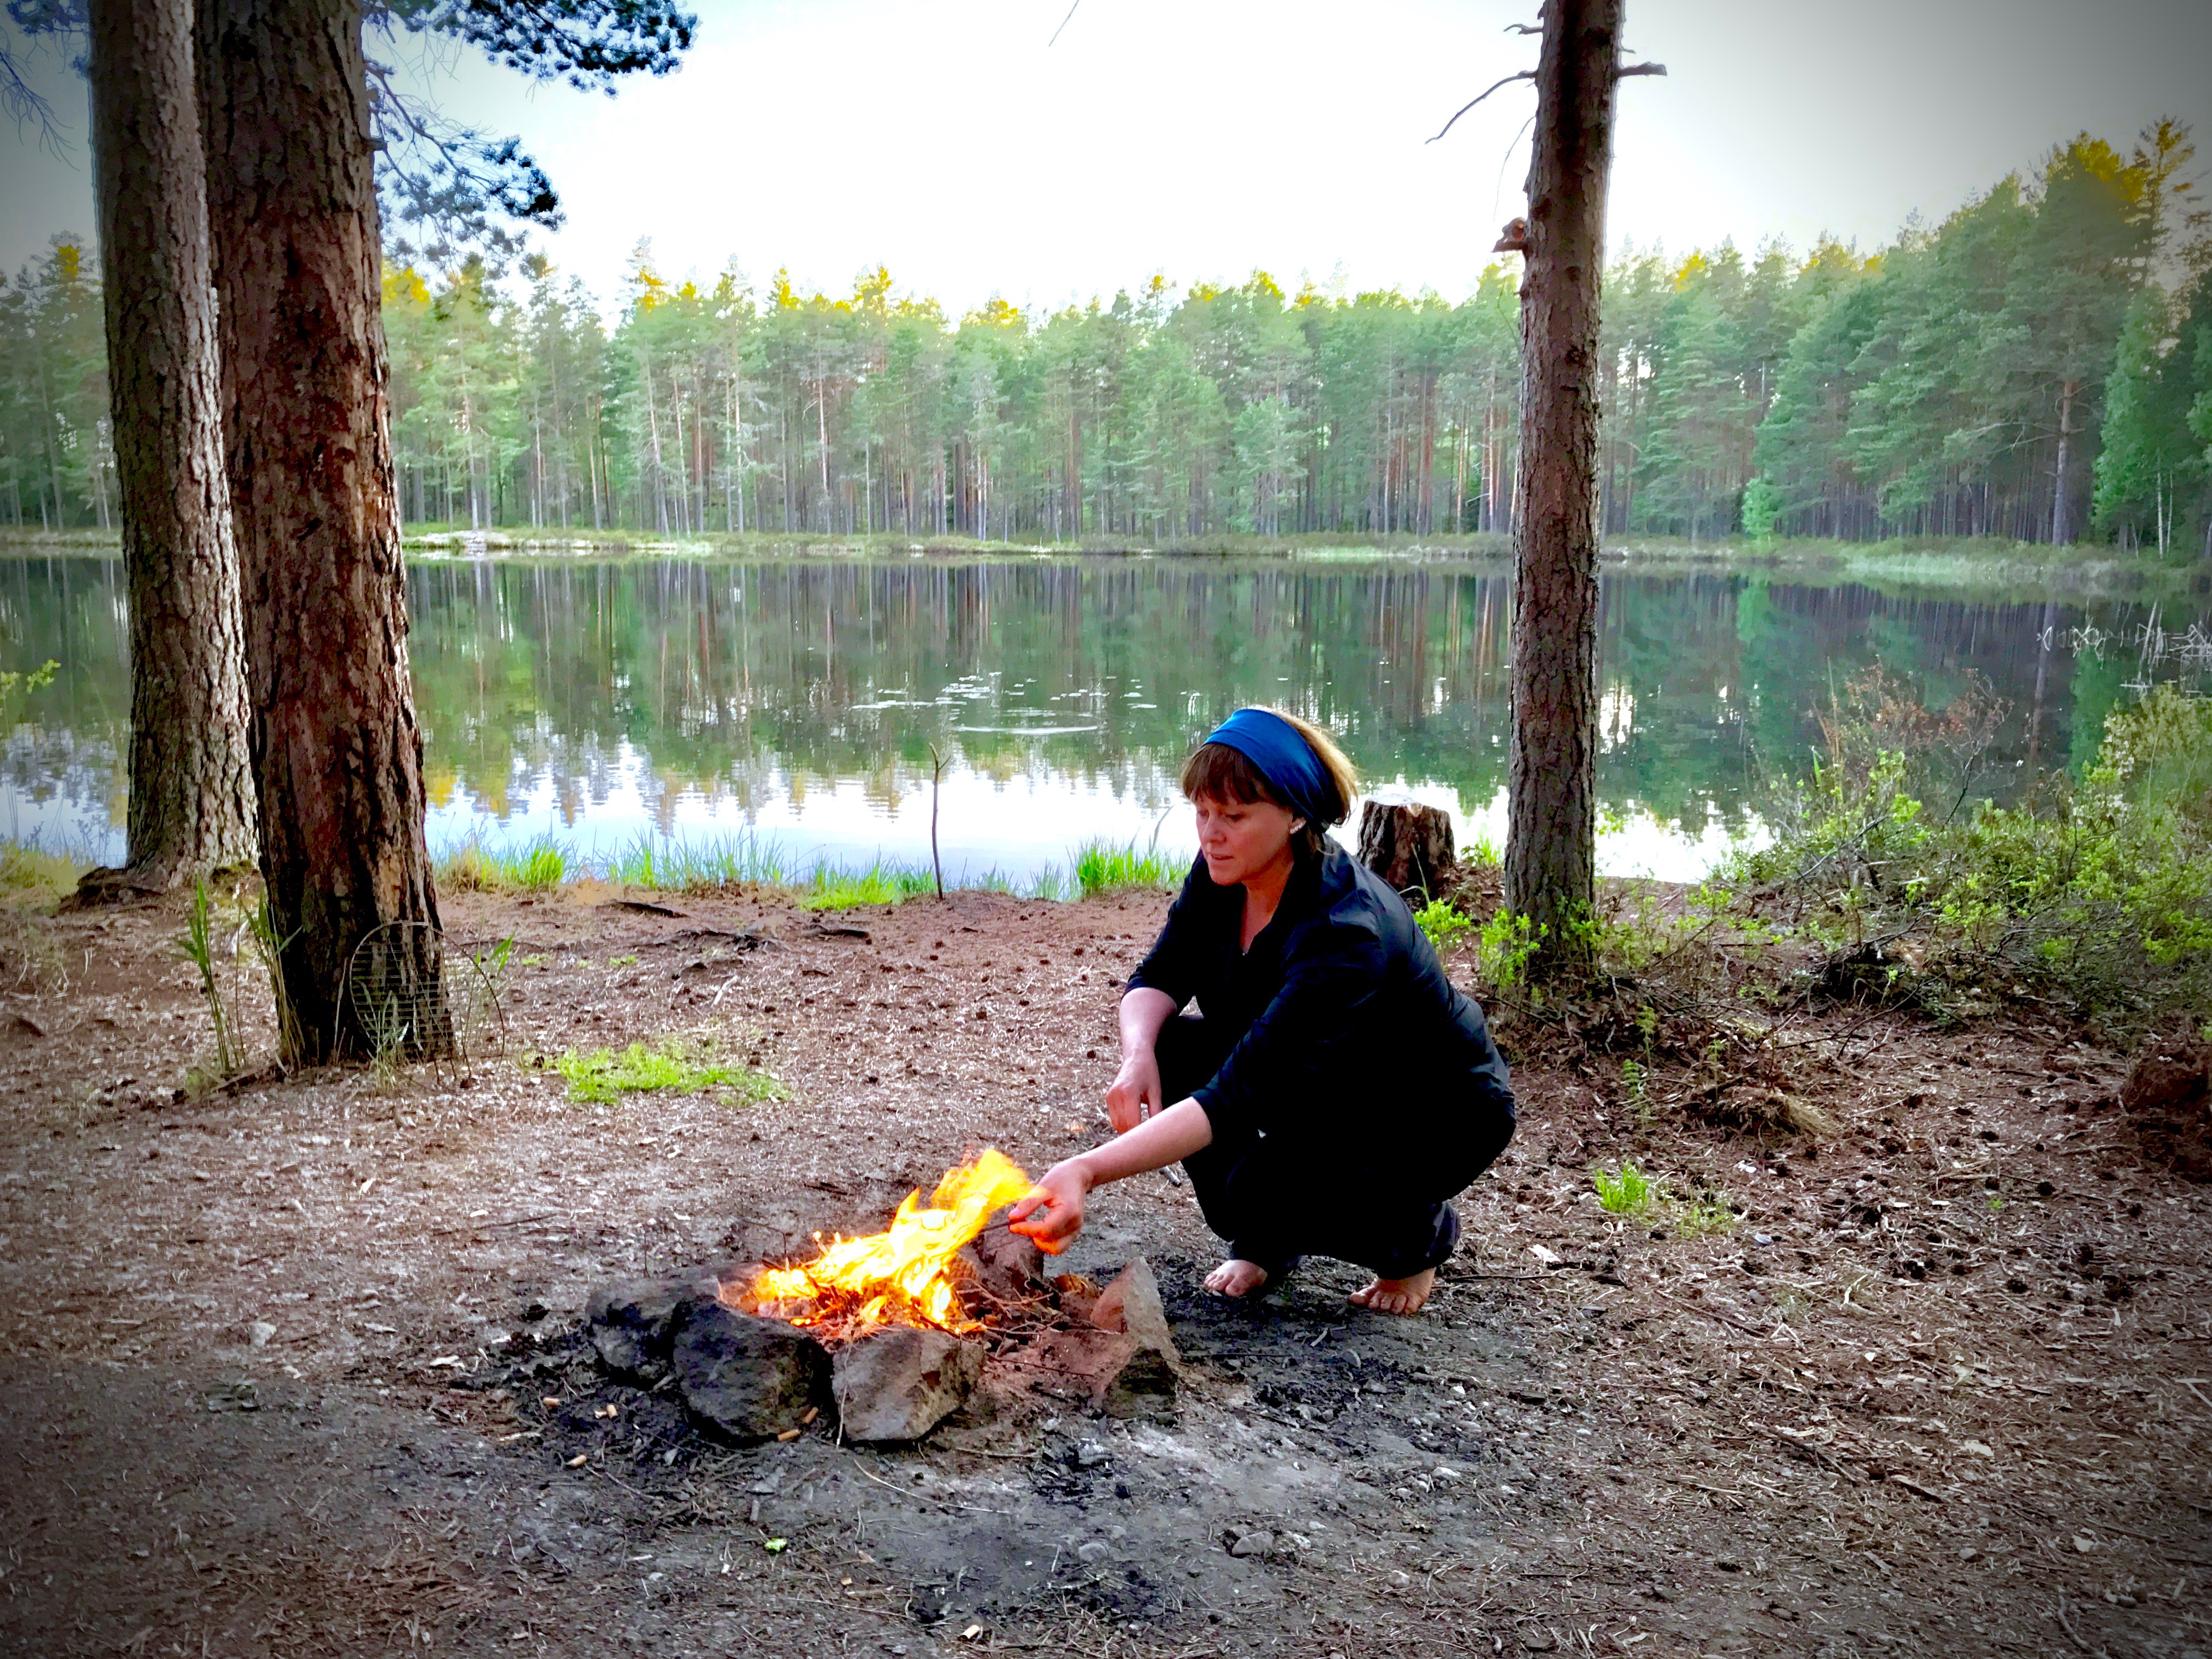 By the camp fire in Sweden